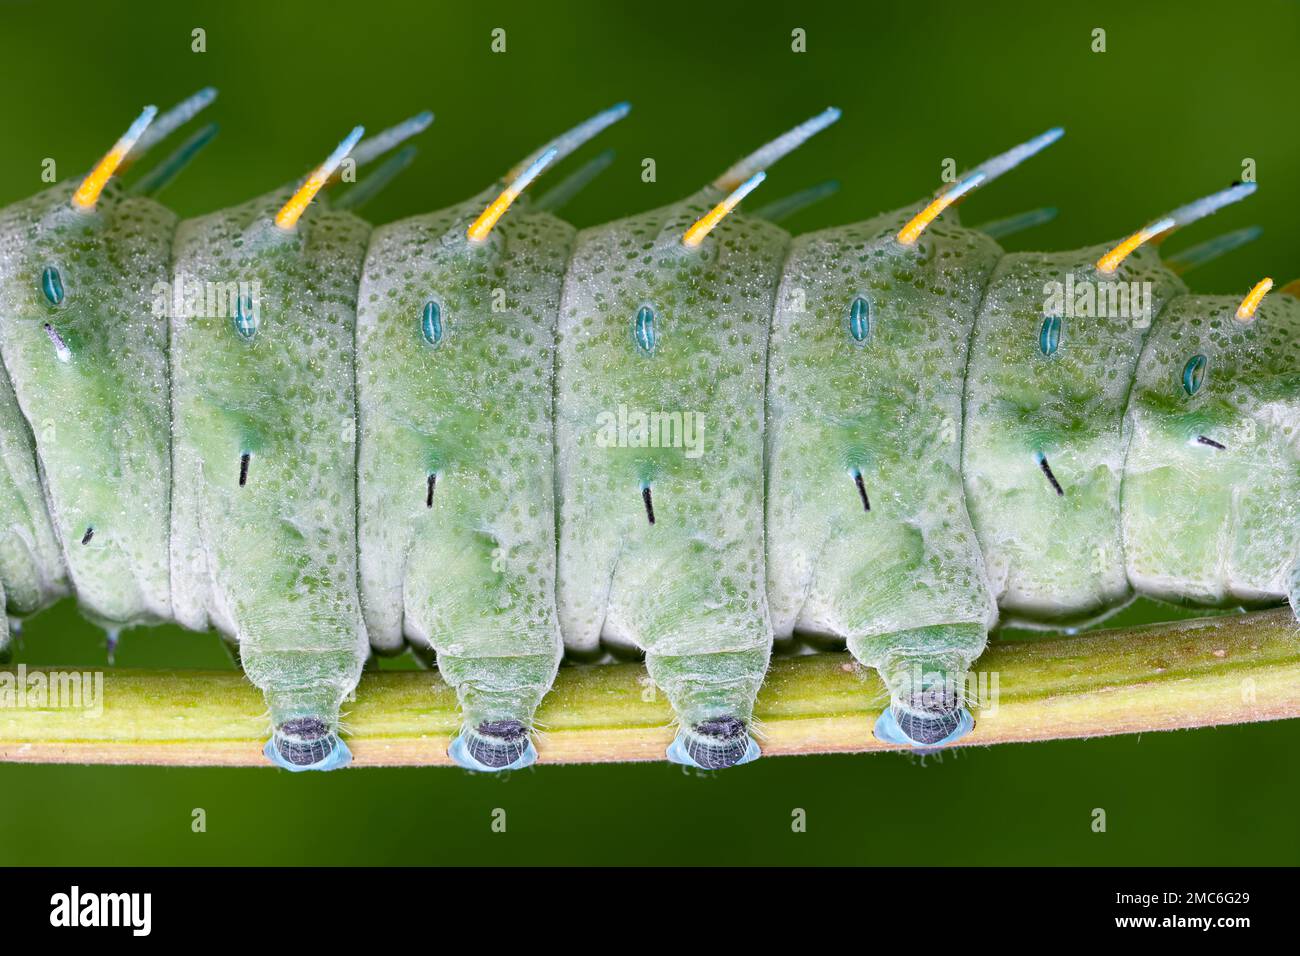 Lorquin's Atlas Moth (Attacus lorquini) abstract of legs and segments of a 4th instar larvae. . Photographed in the Philippines. Stock Photo